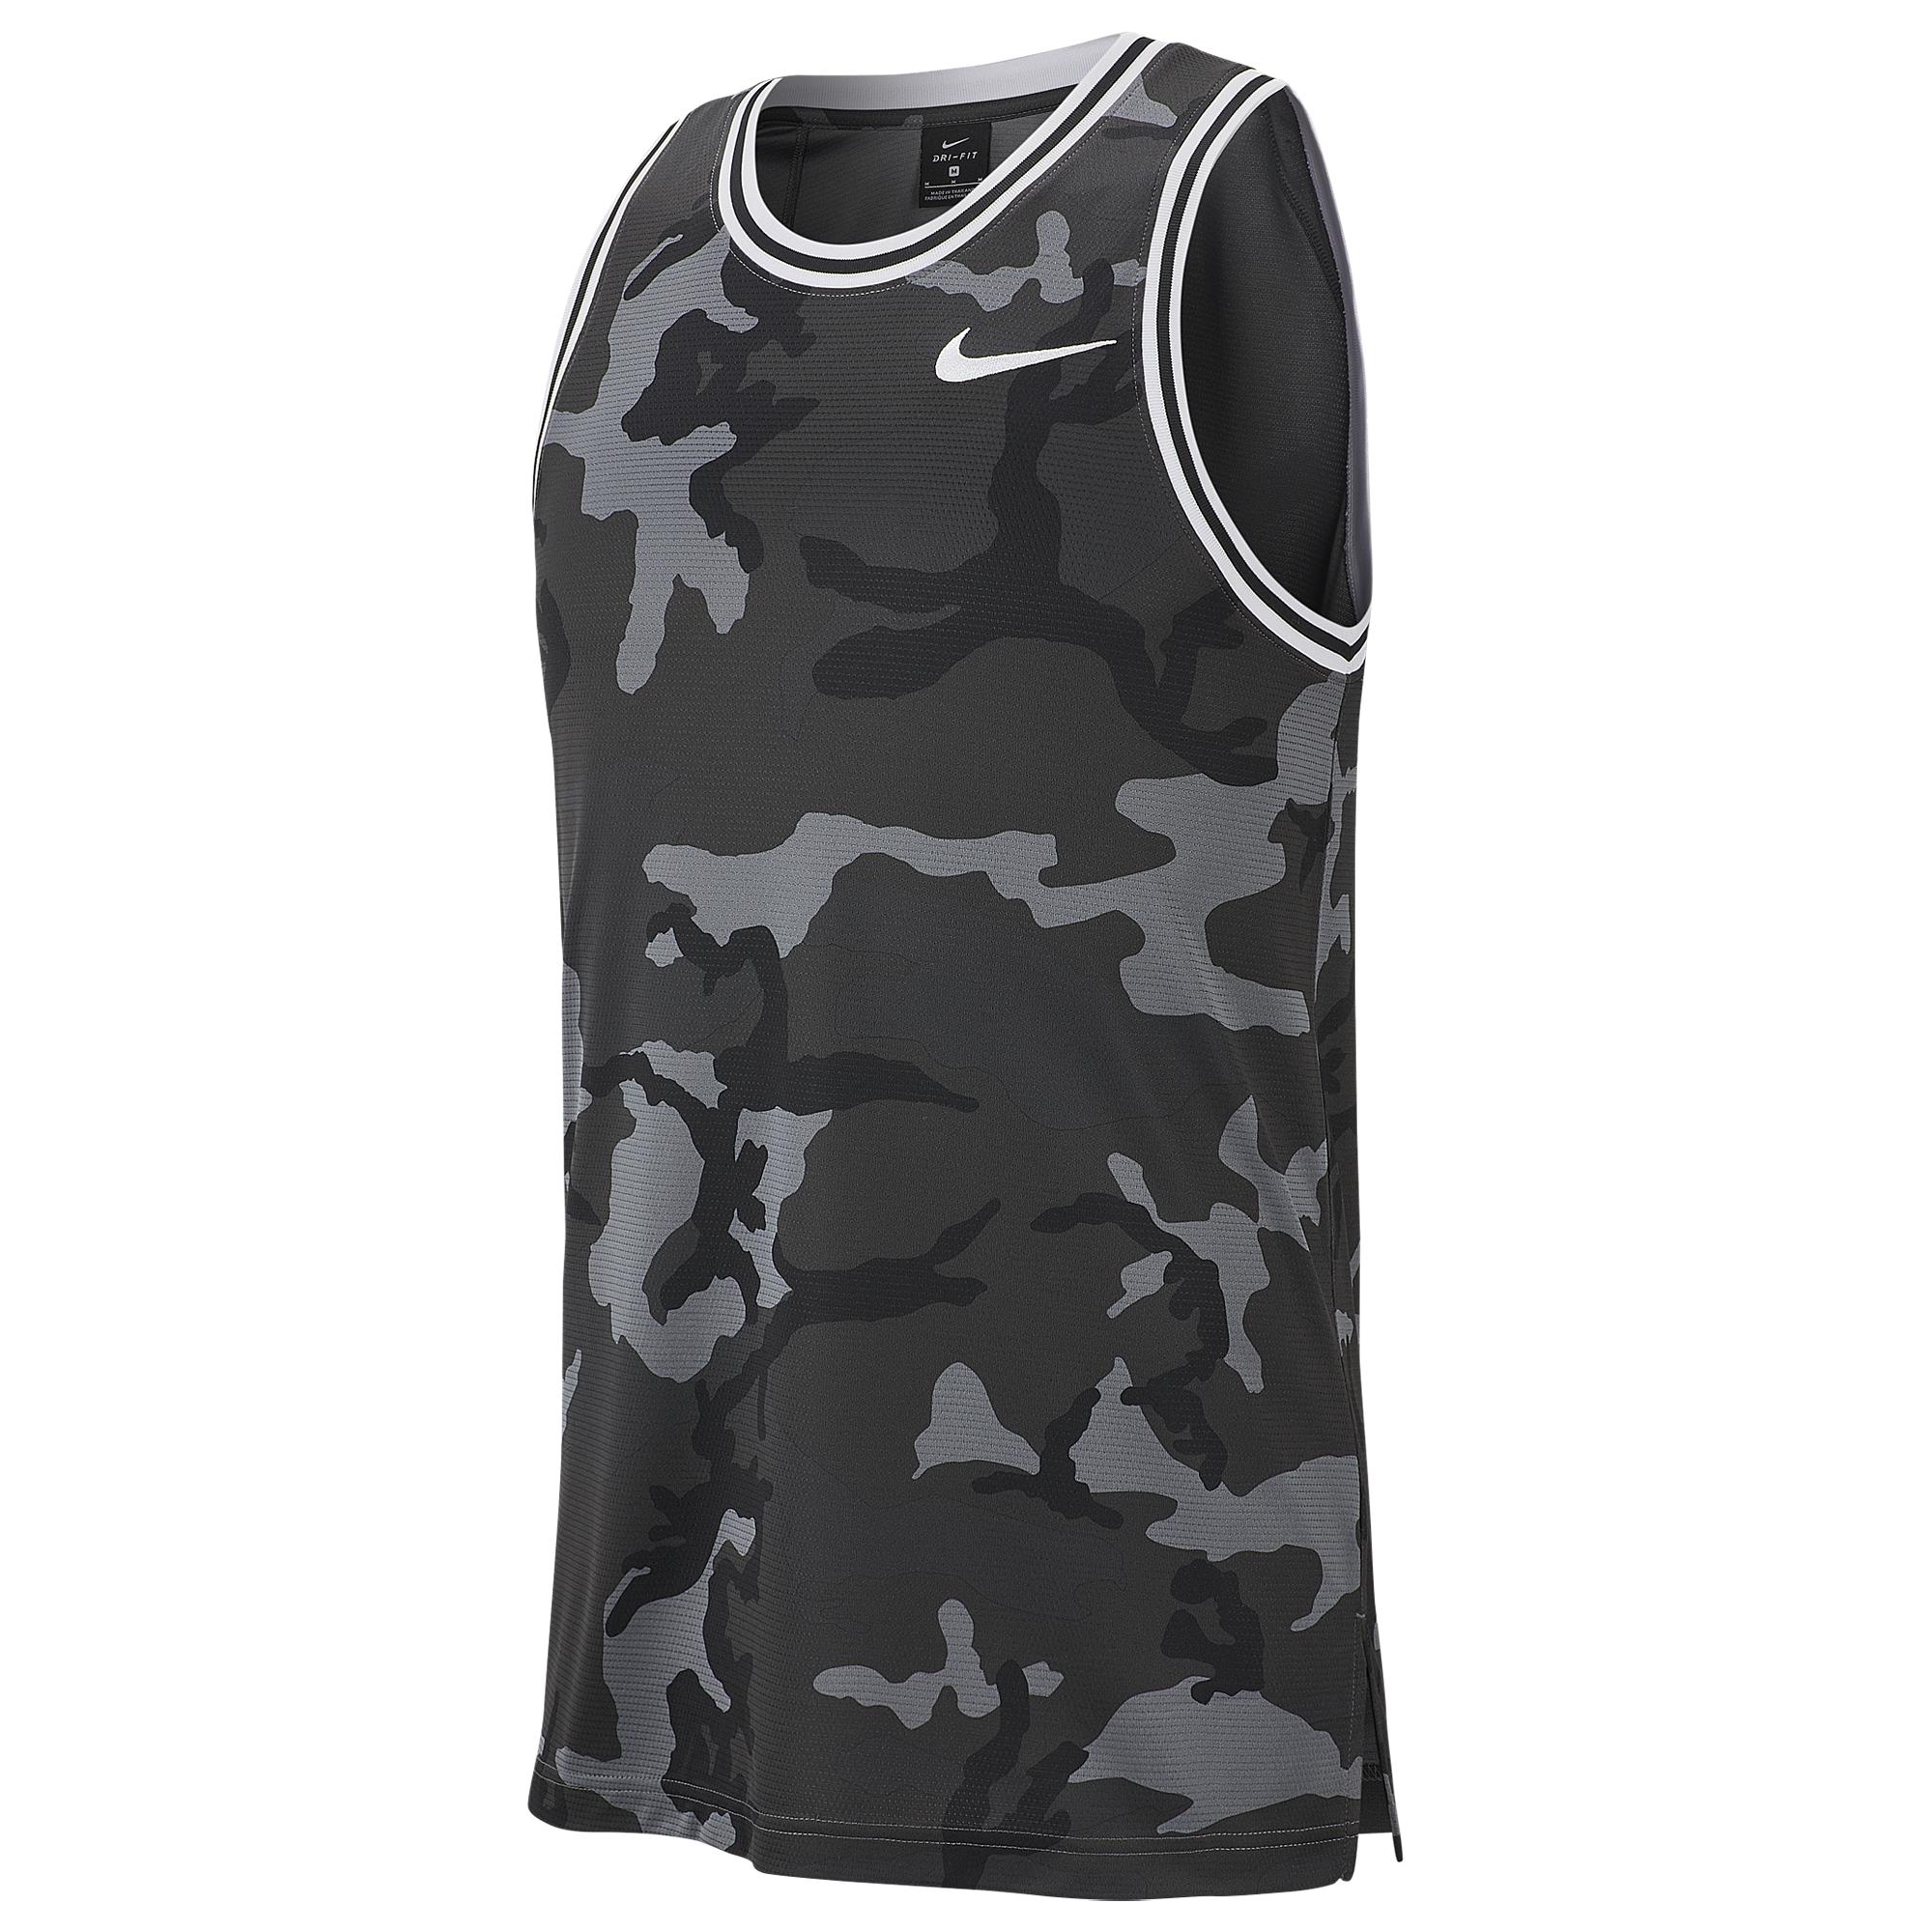 Nike Synthetic Dna Camo Jersey in Dark 